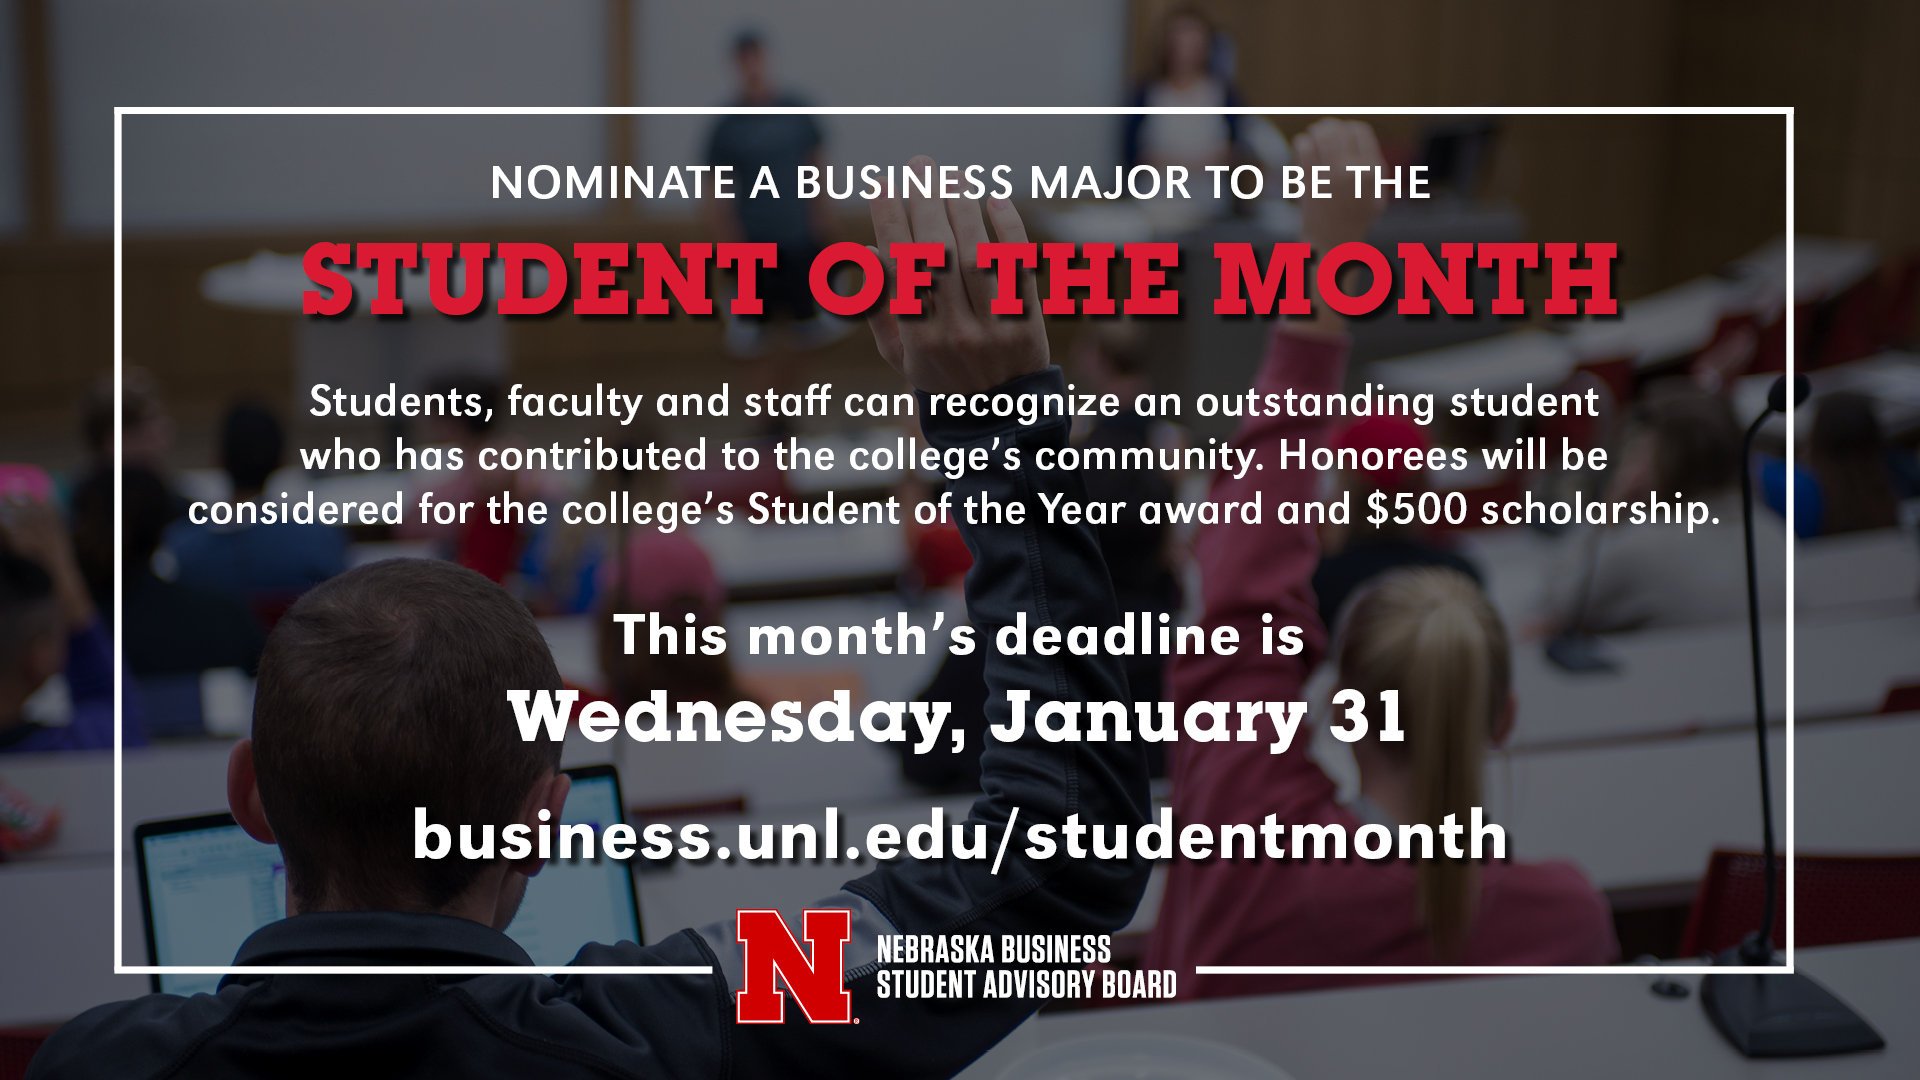 Nominate Business Majors for the Inaugural Student of the Month Award